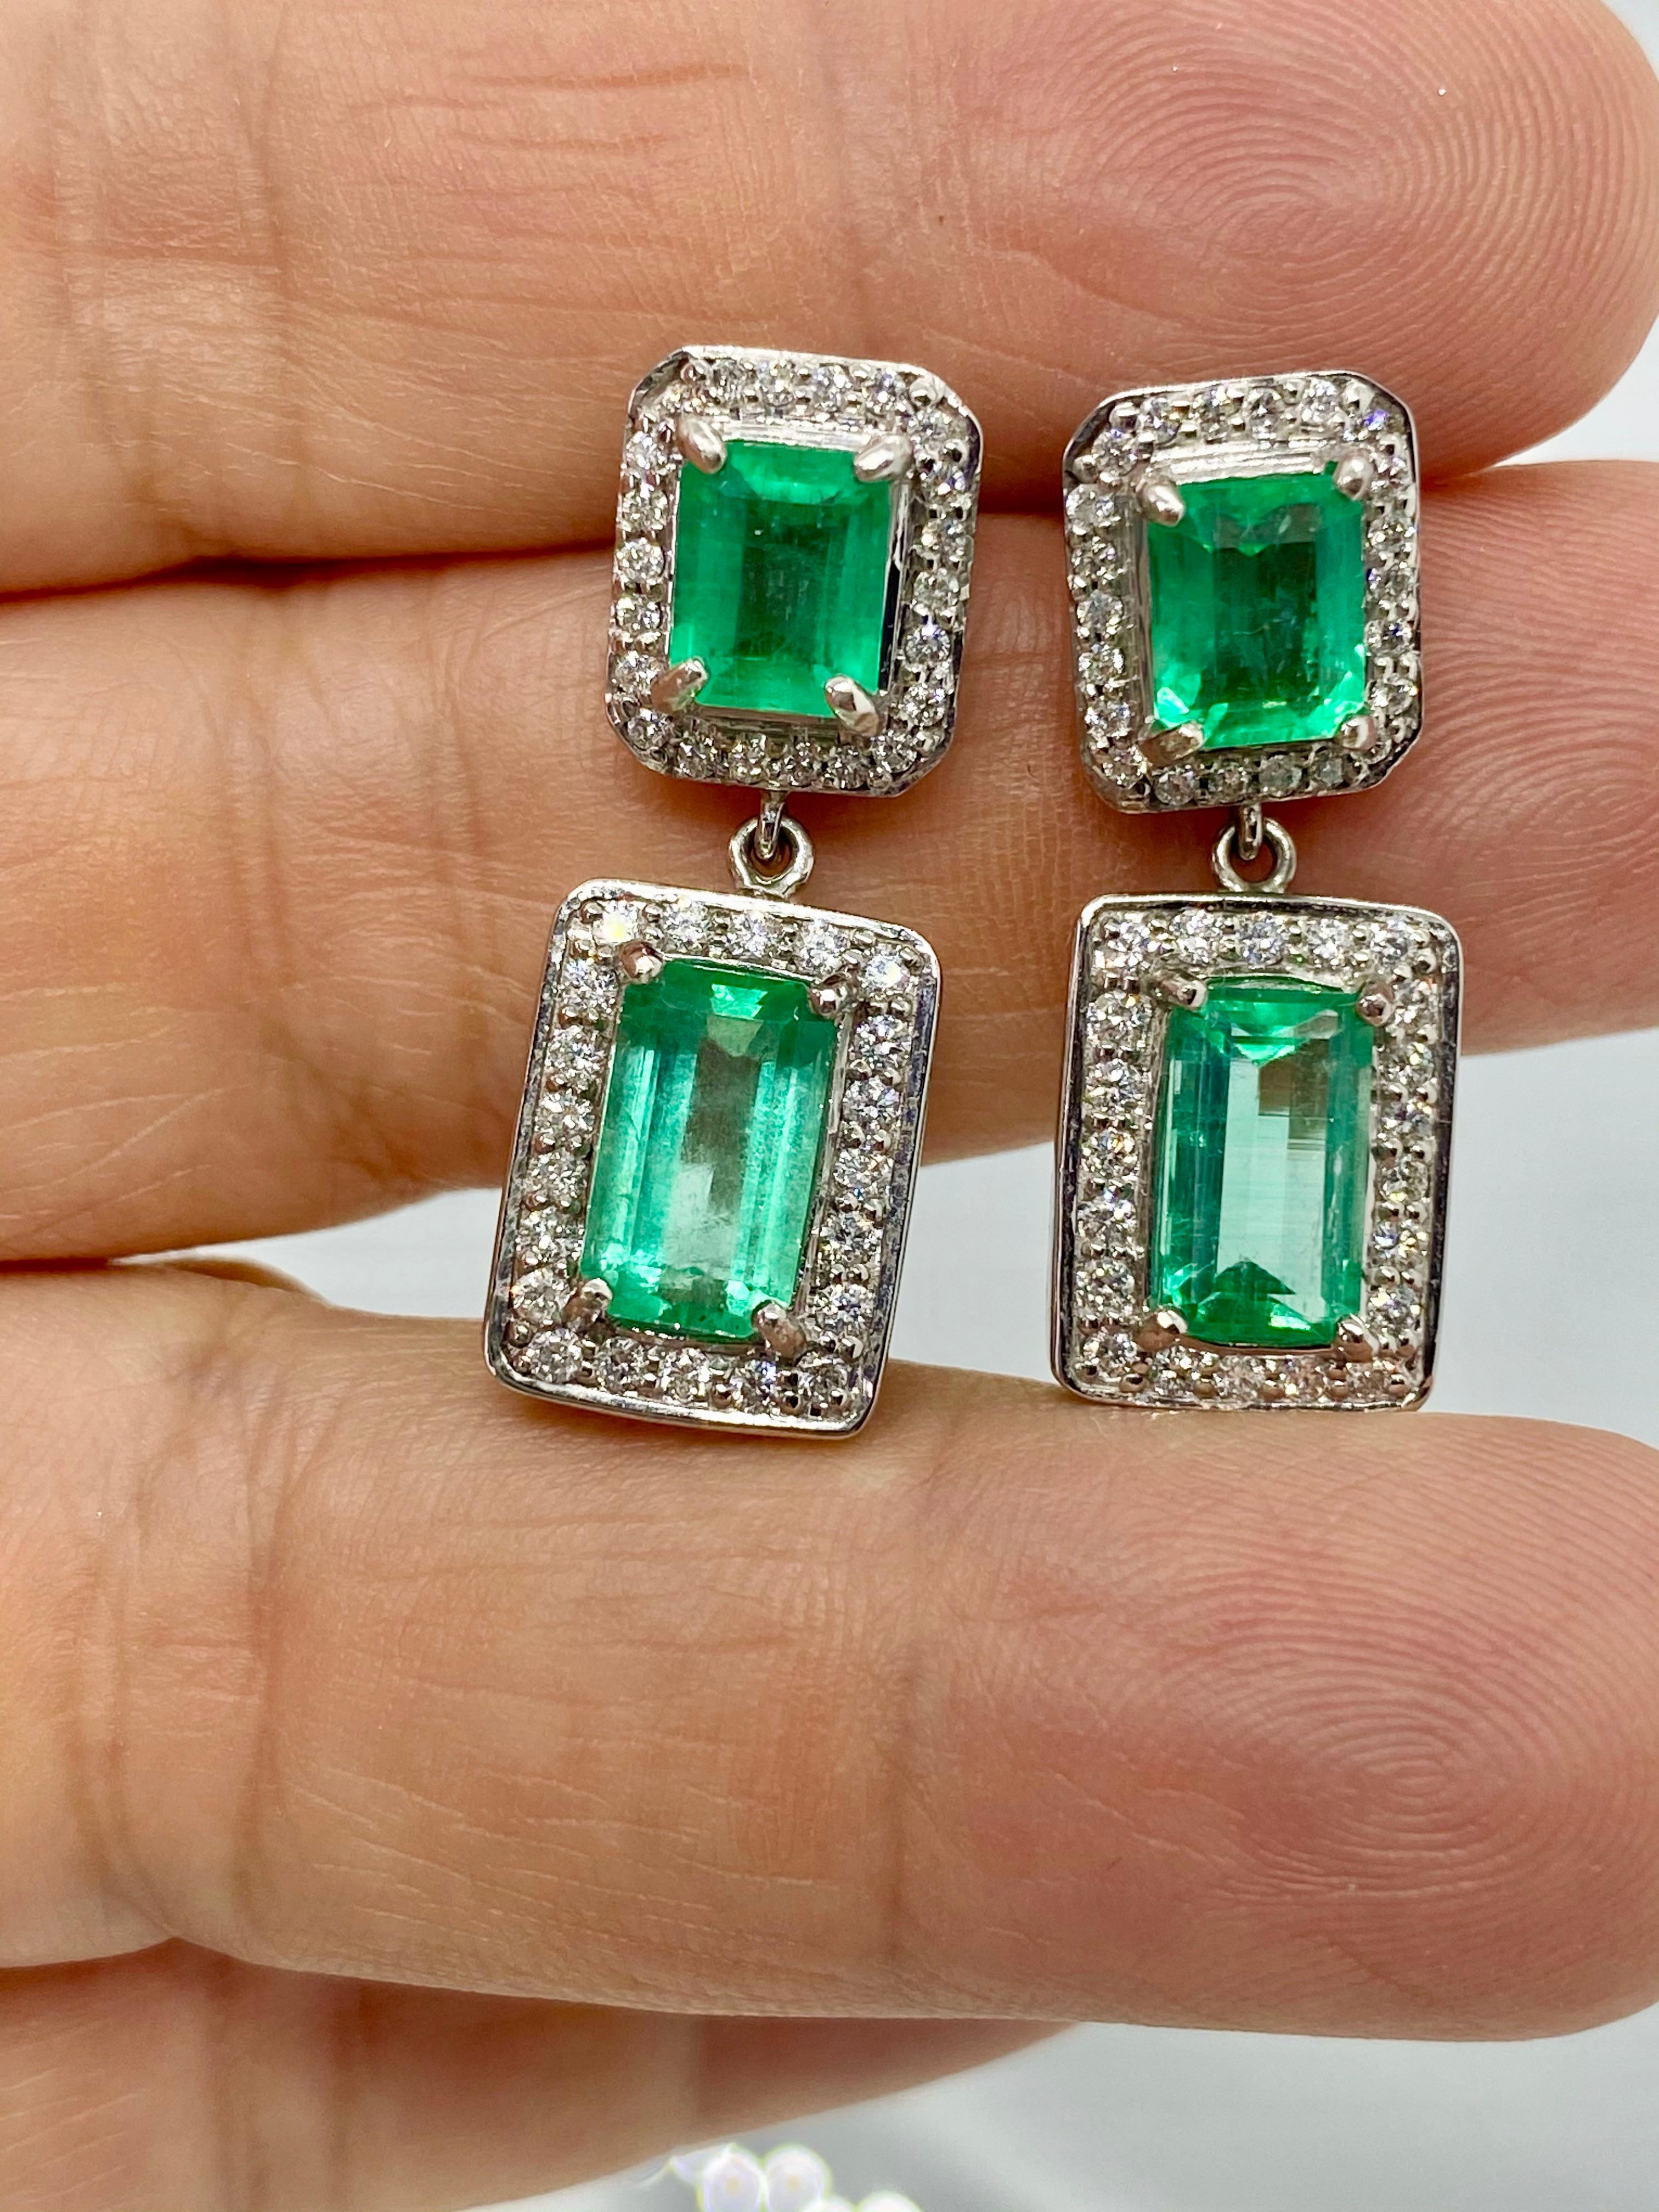 Elegant Natural Colombian Emerald and Diamond Drop Dangle Earrings 18K White Gold 
Primary Stones: 100% Natural Colombian Emerald 
Shape or Cut Emerald: Emerald Cut   
Color/Clarity: Brilliant Medium 100% NATURAL Green Color/ Clarity VS 
Total